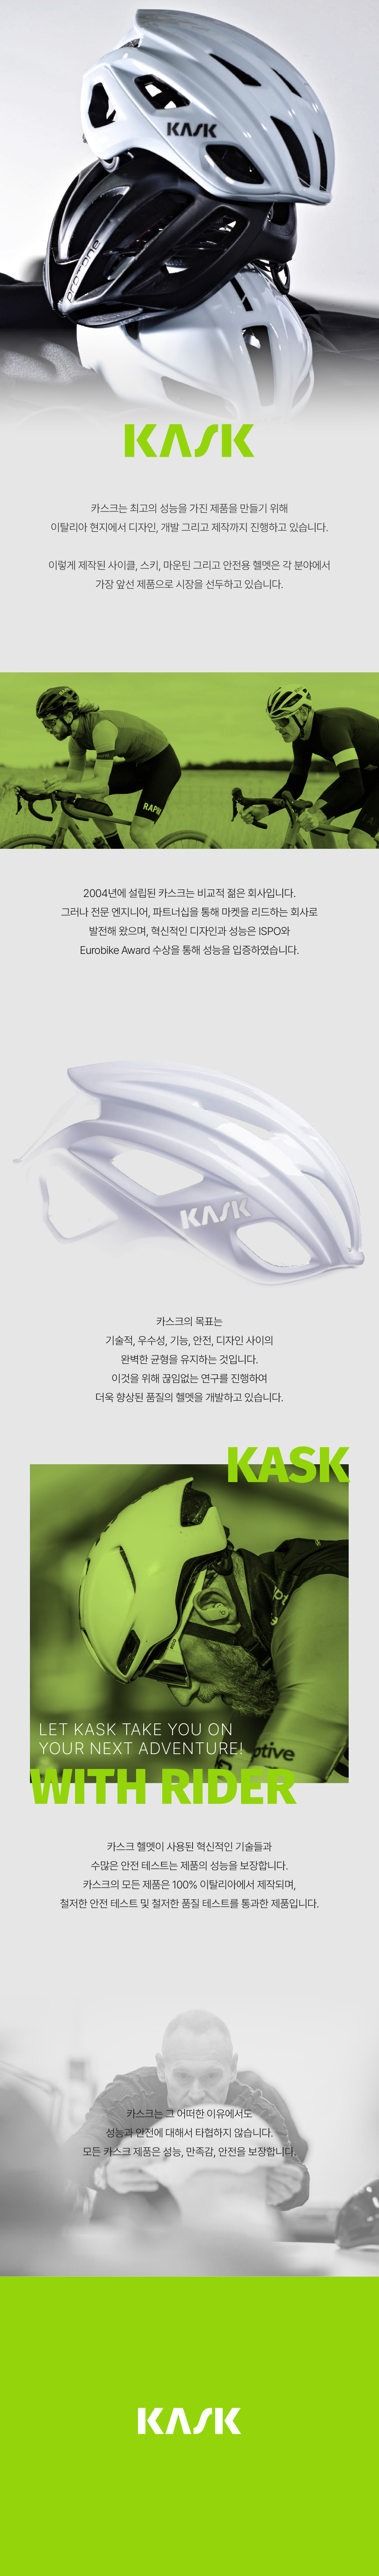 20220913_kask_introduce_2.png